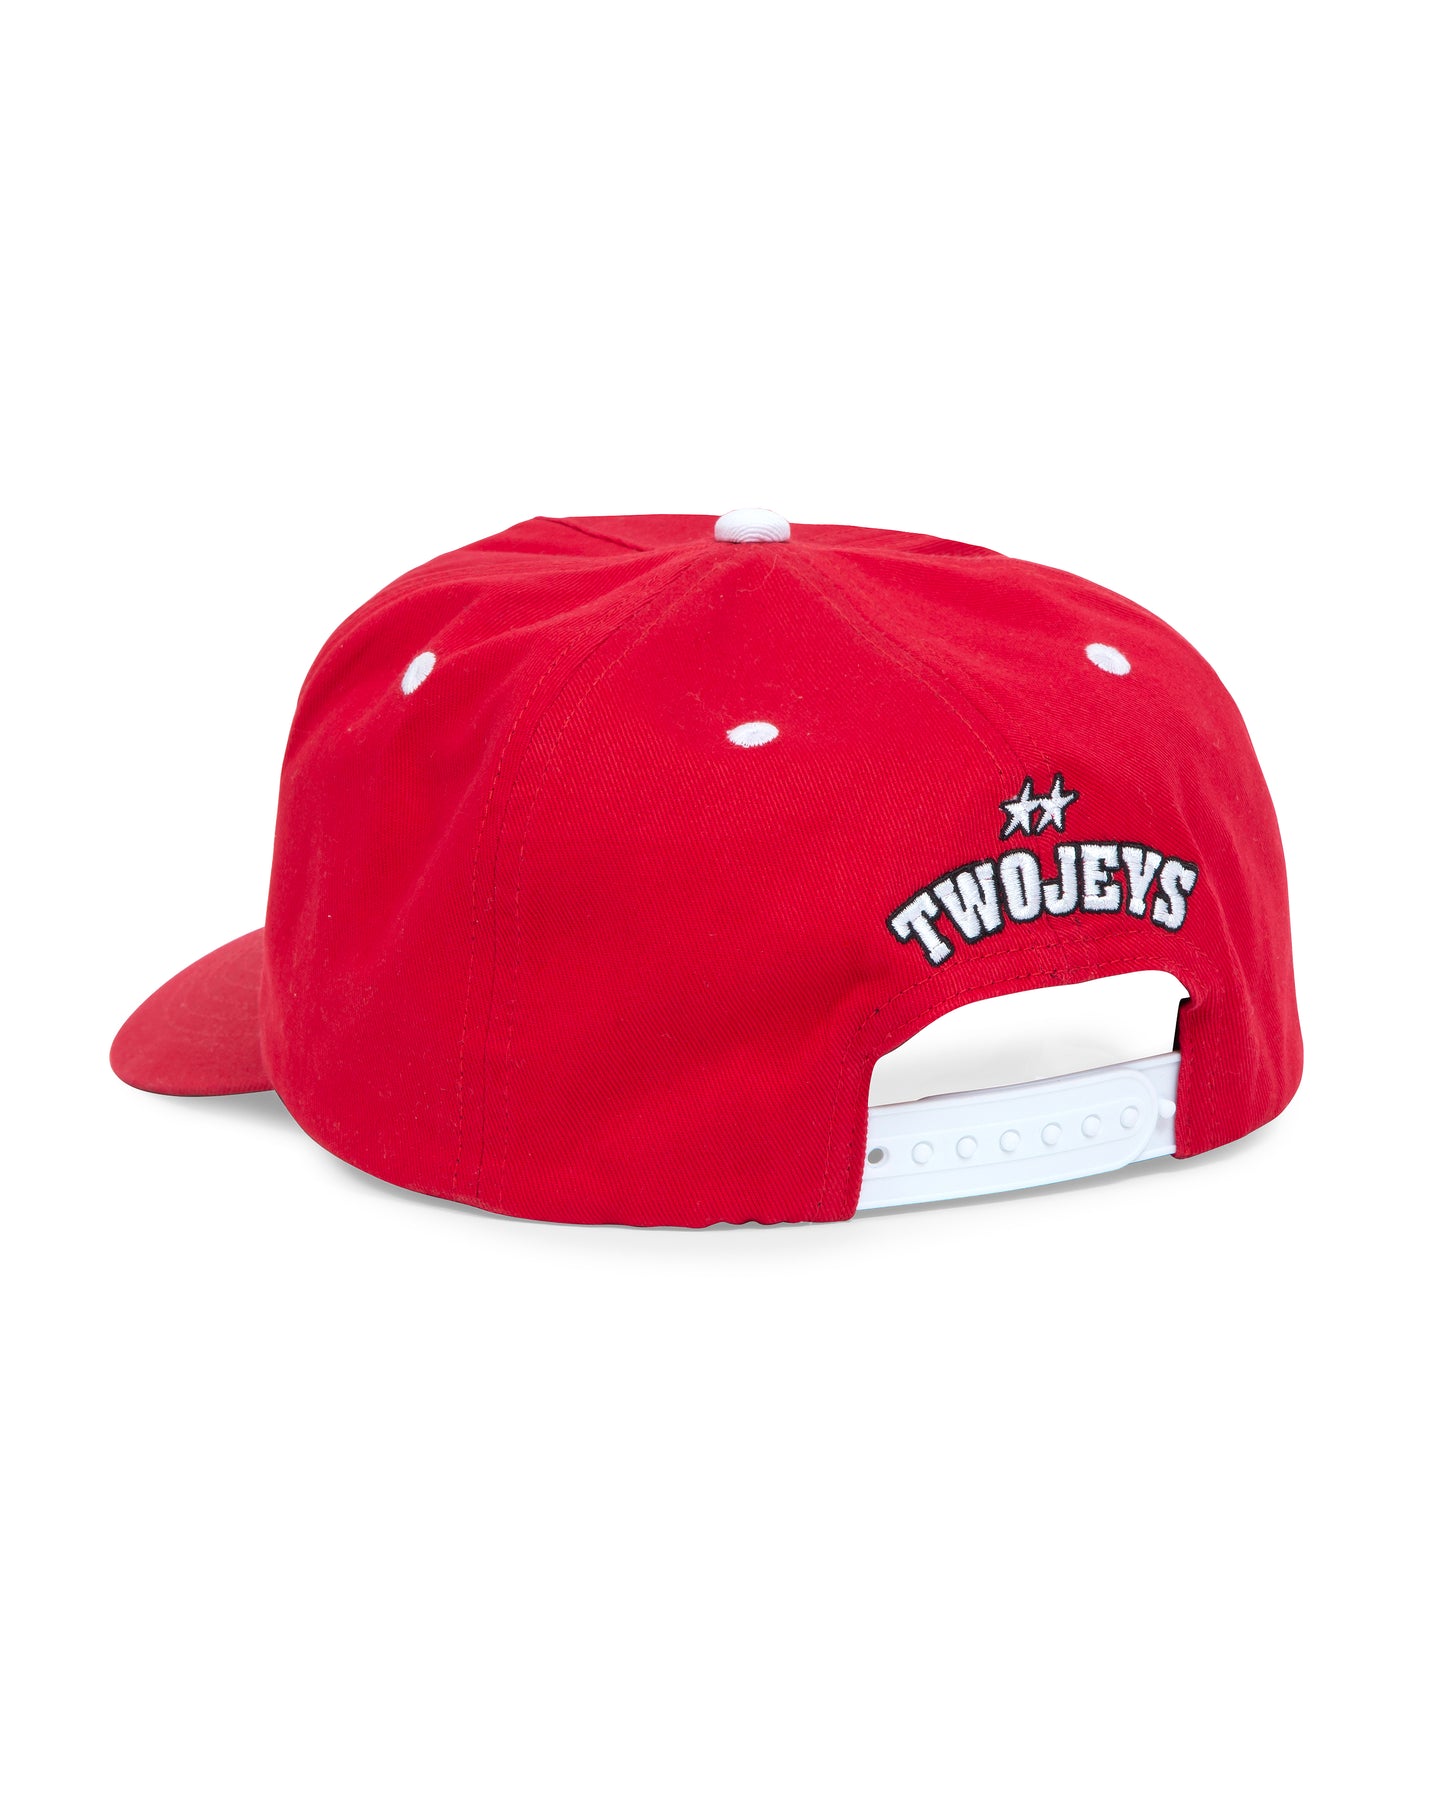 Twojeys Youth Cap